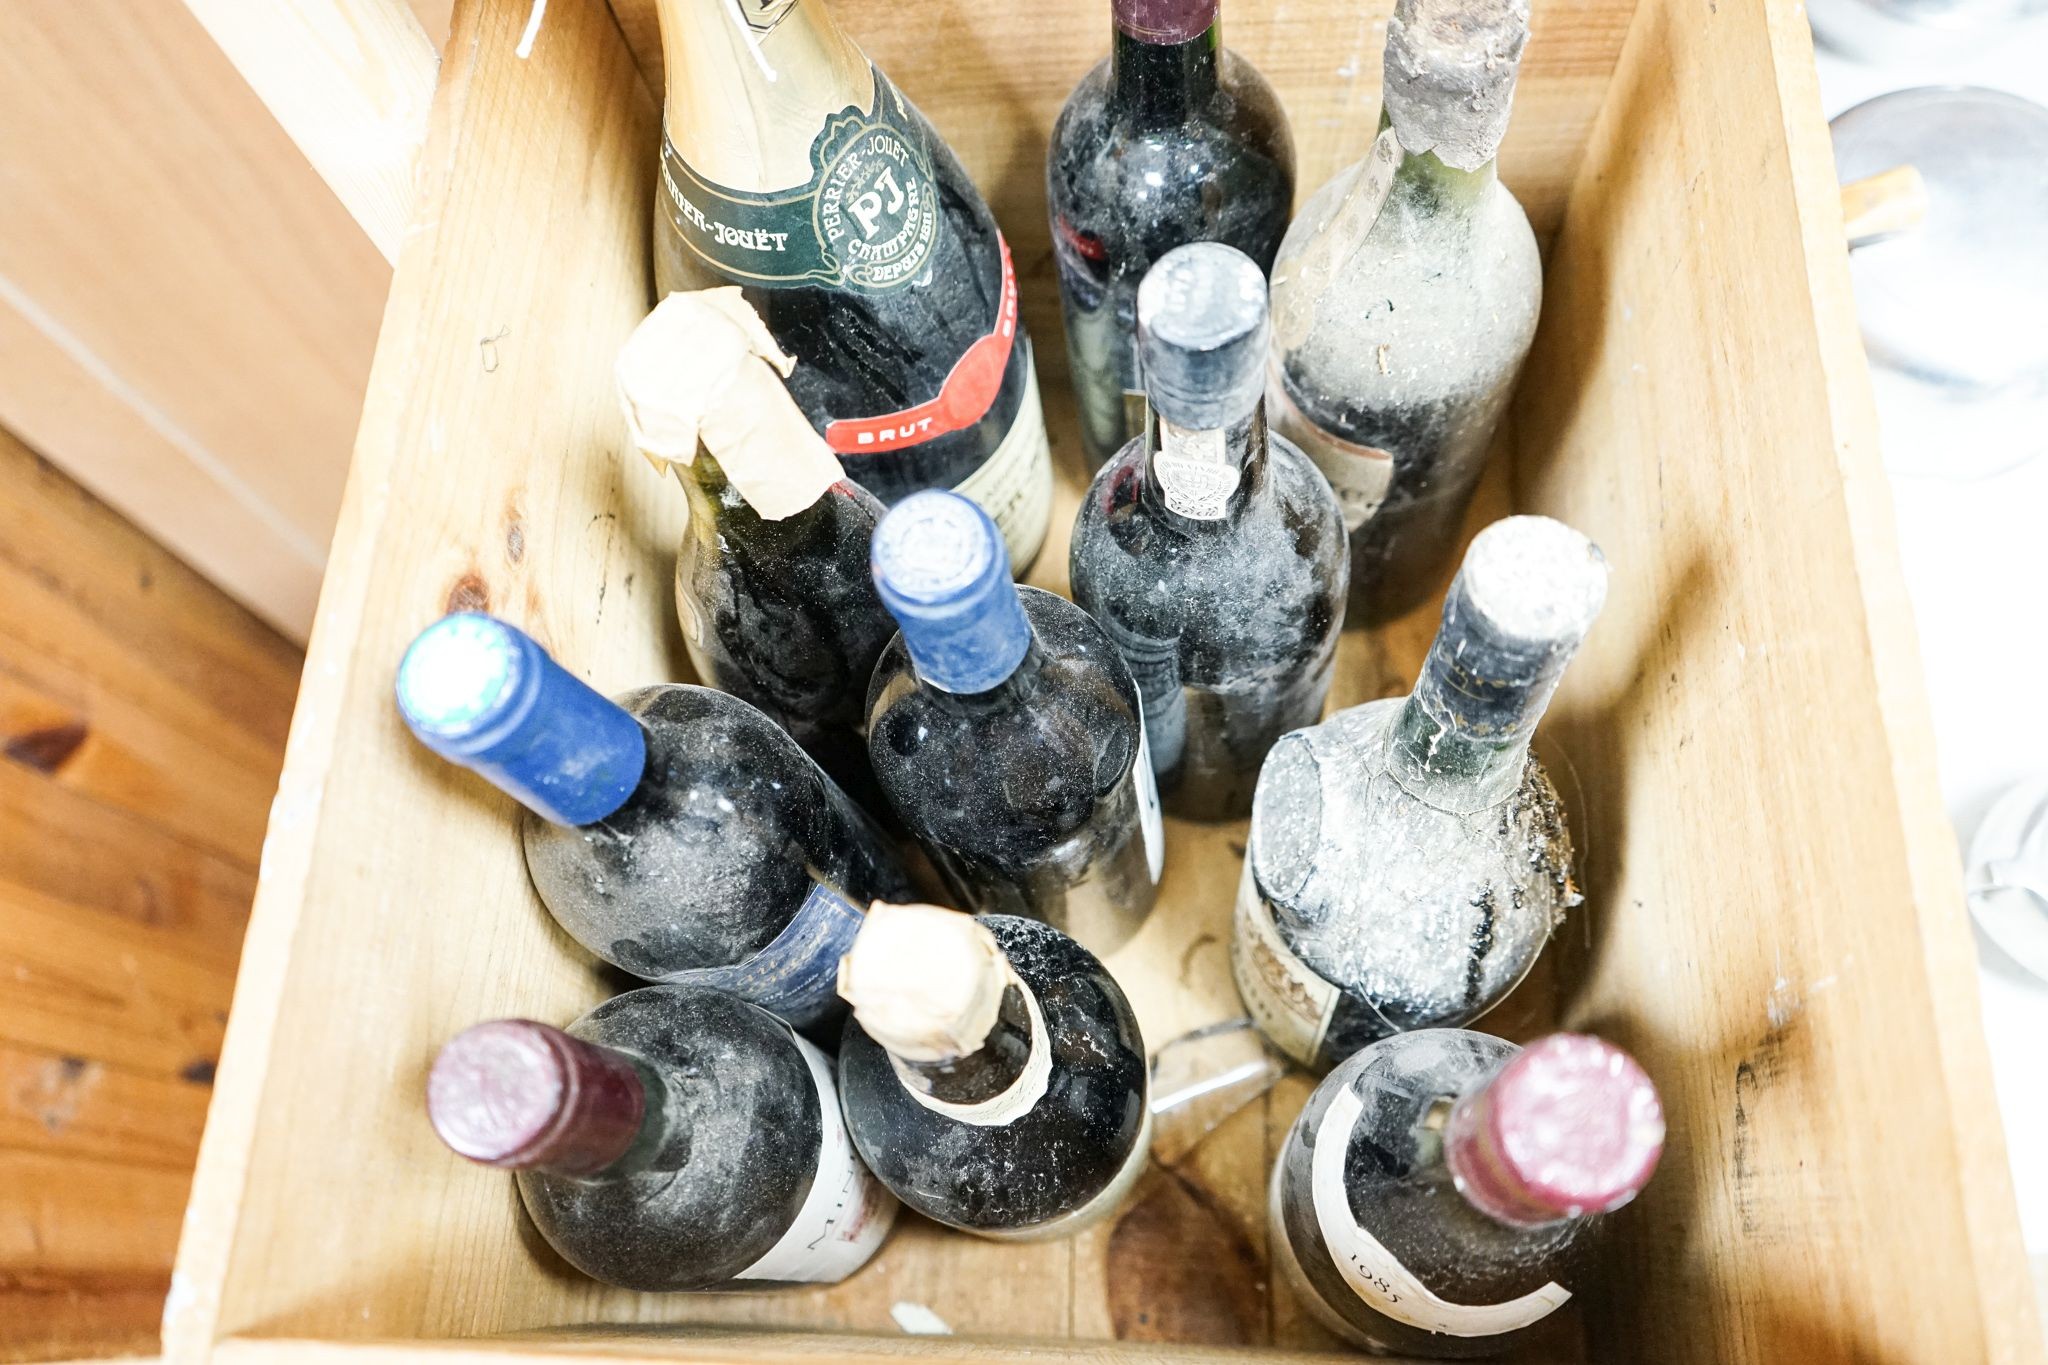 Assorted wines, port and champagne, 11 bottles